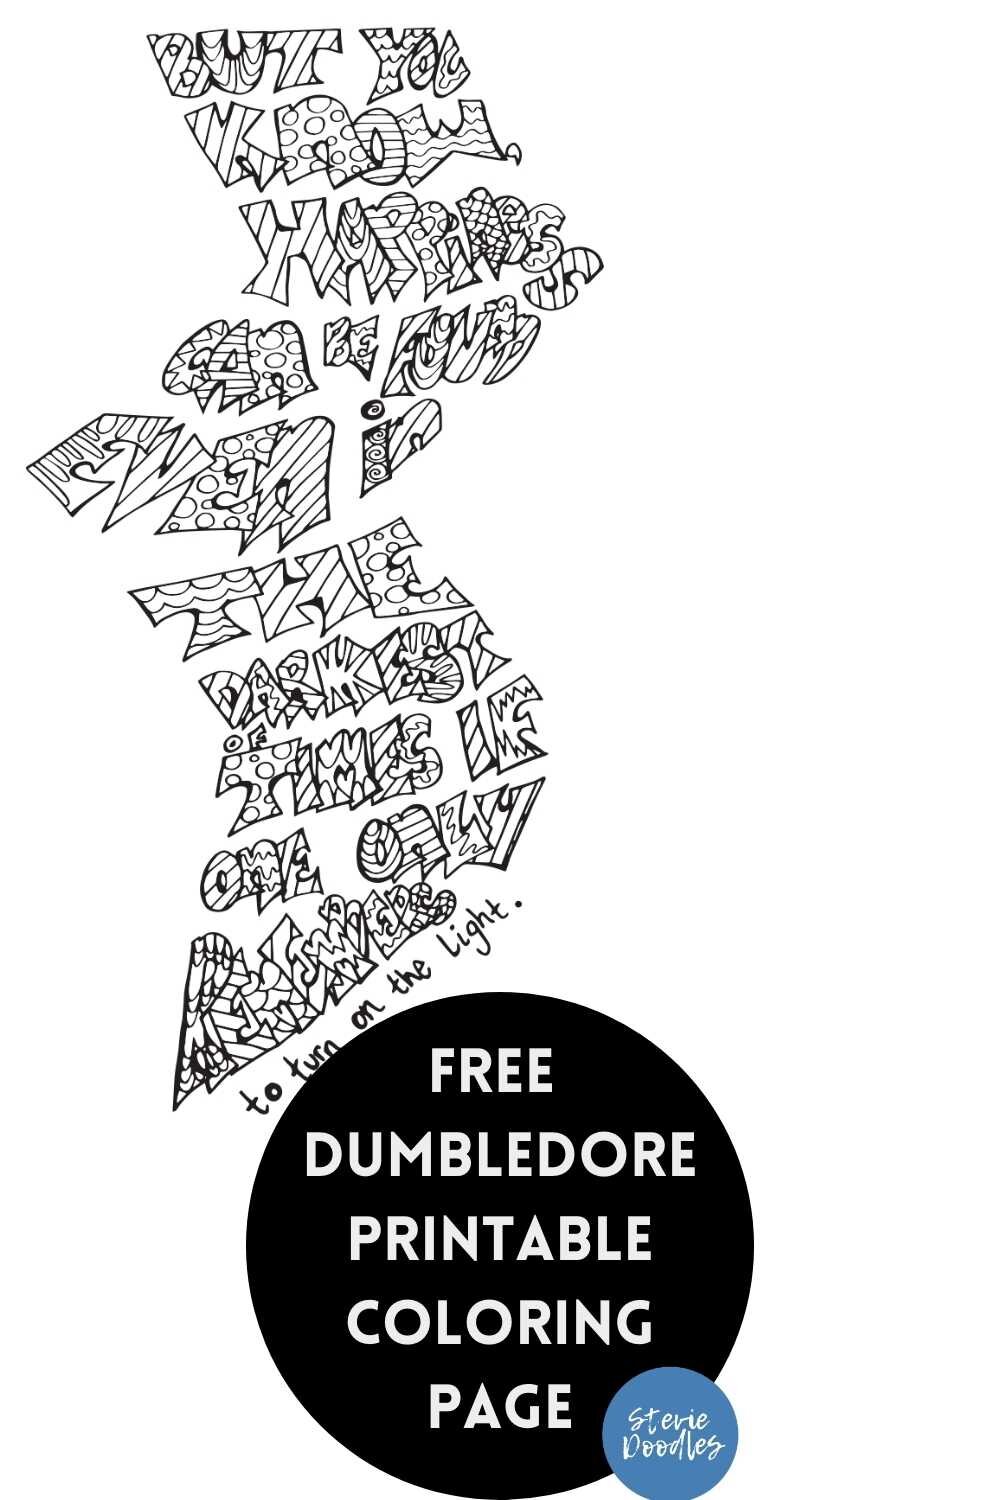 free dumbledore coloring page happiness.jpg